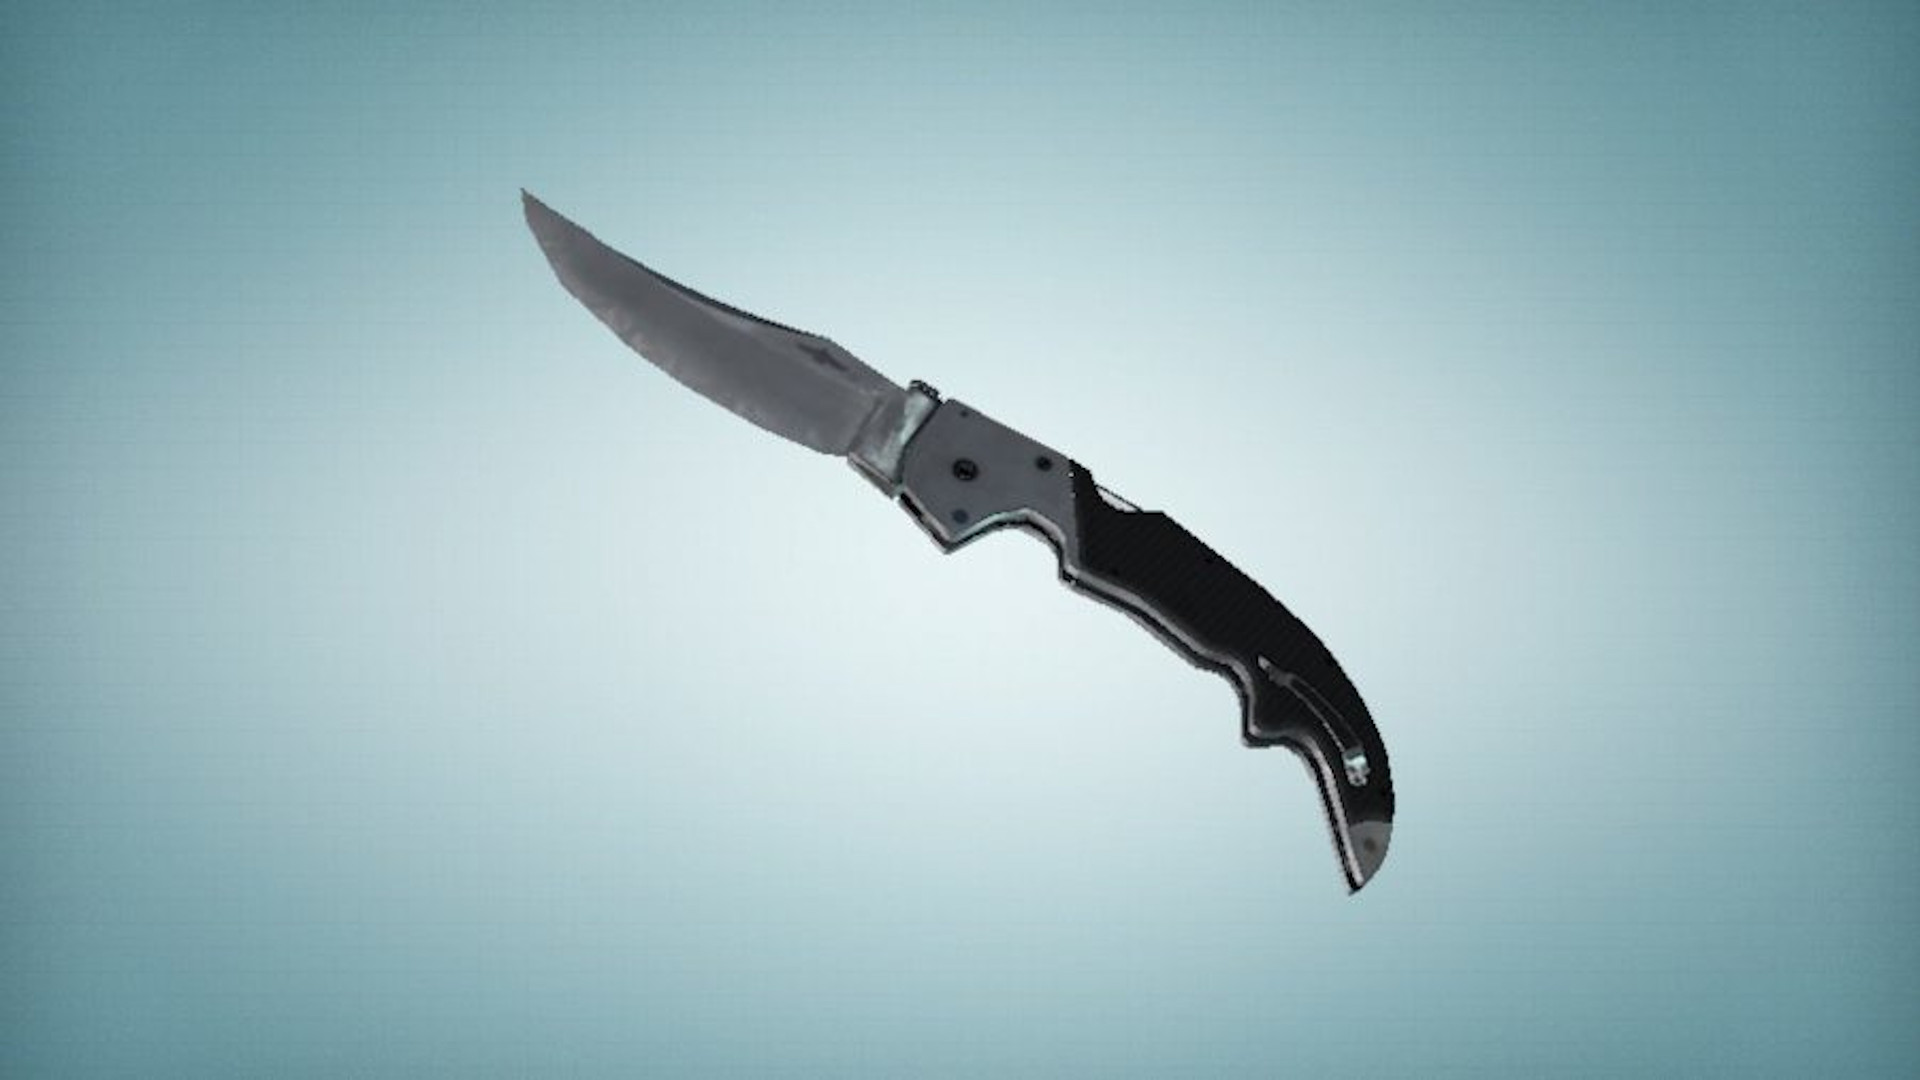 What Is the Cheapest CSGO Knife You Can Buy In 2022?